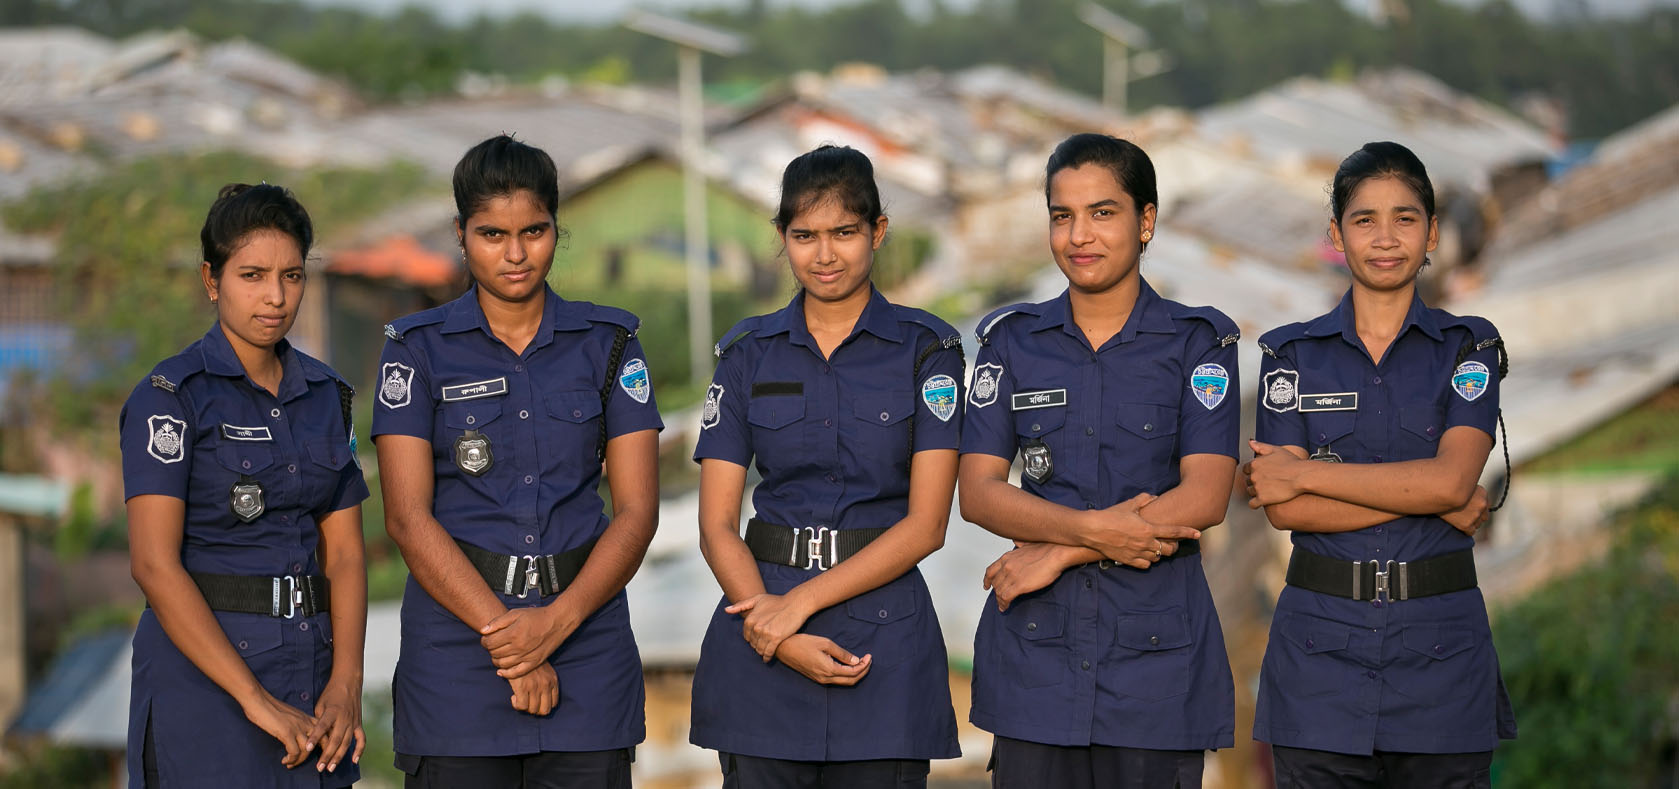 Bangladeshi police officers pose for a photo at their duty station inside a camp for Rohingya refugees in Cox’s Bazar, Bangladesh. Photo: UN Women/Allison Joyce